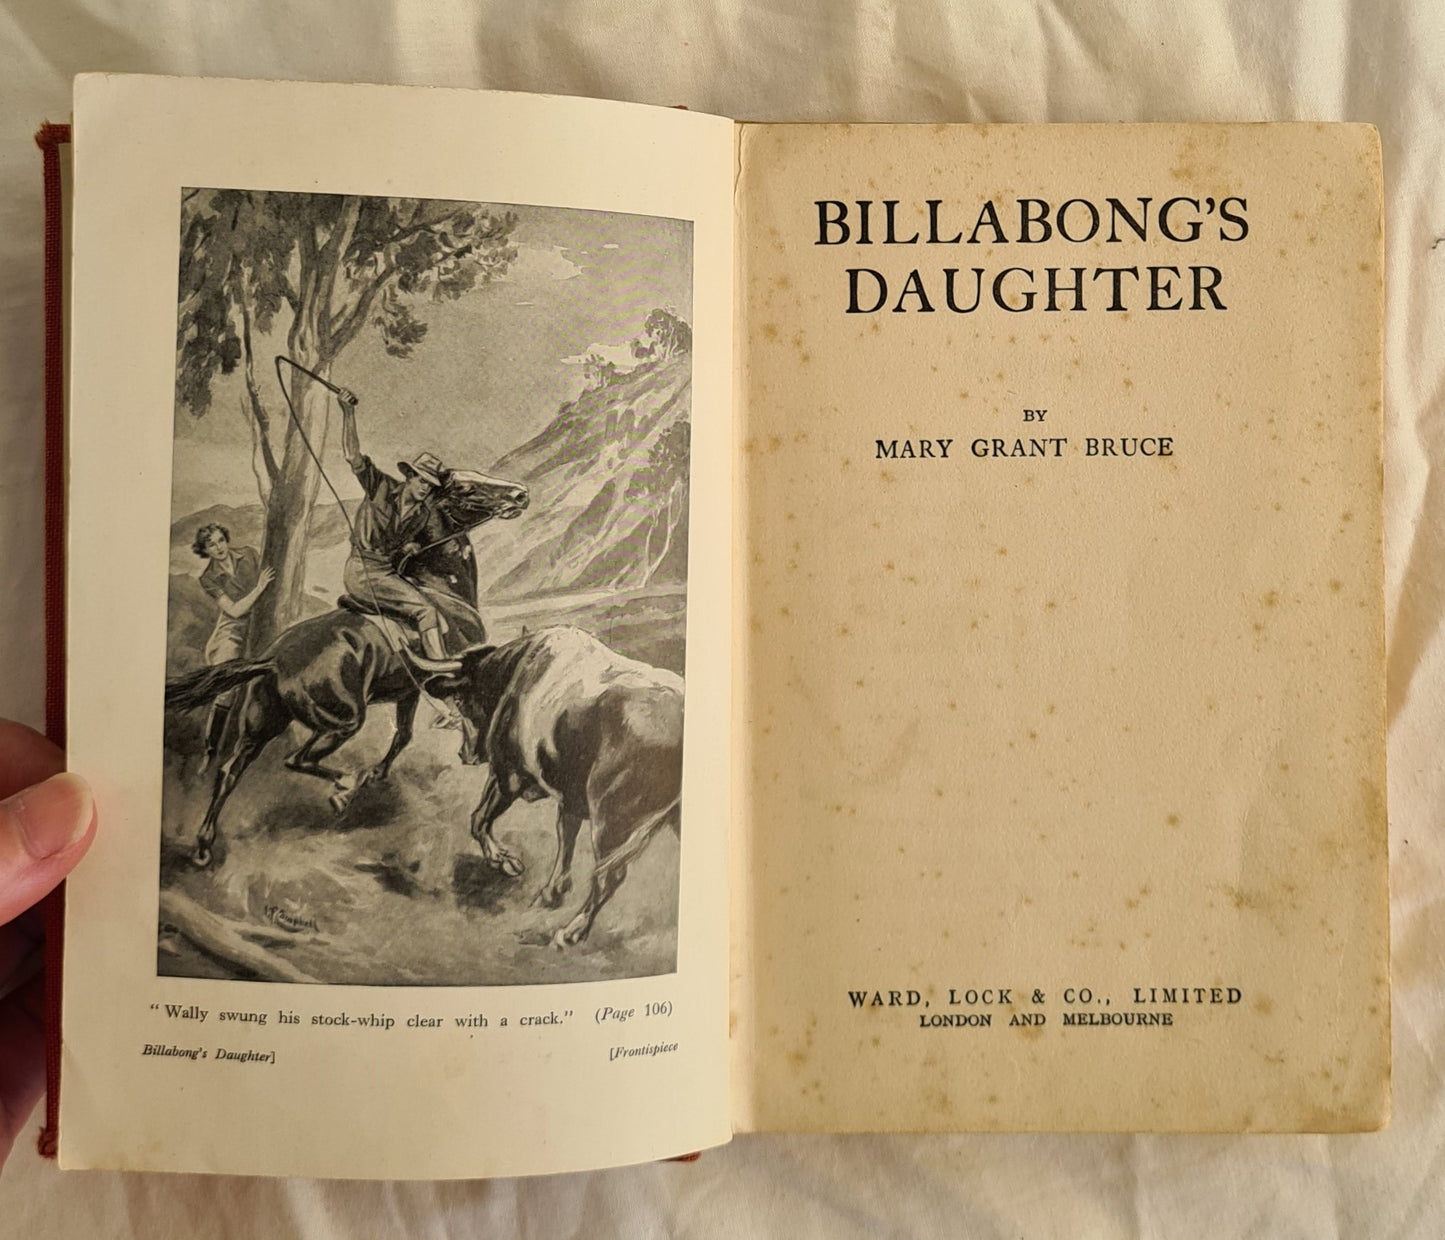 Billabong’s Daughter  by Mary Grant Bruce